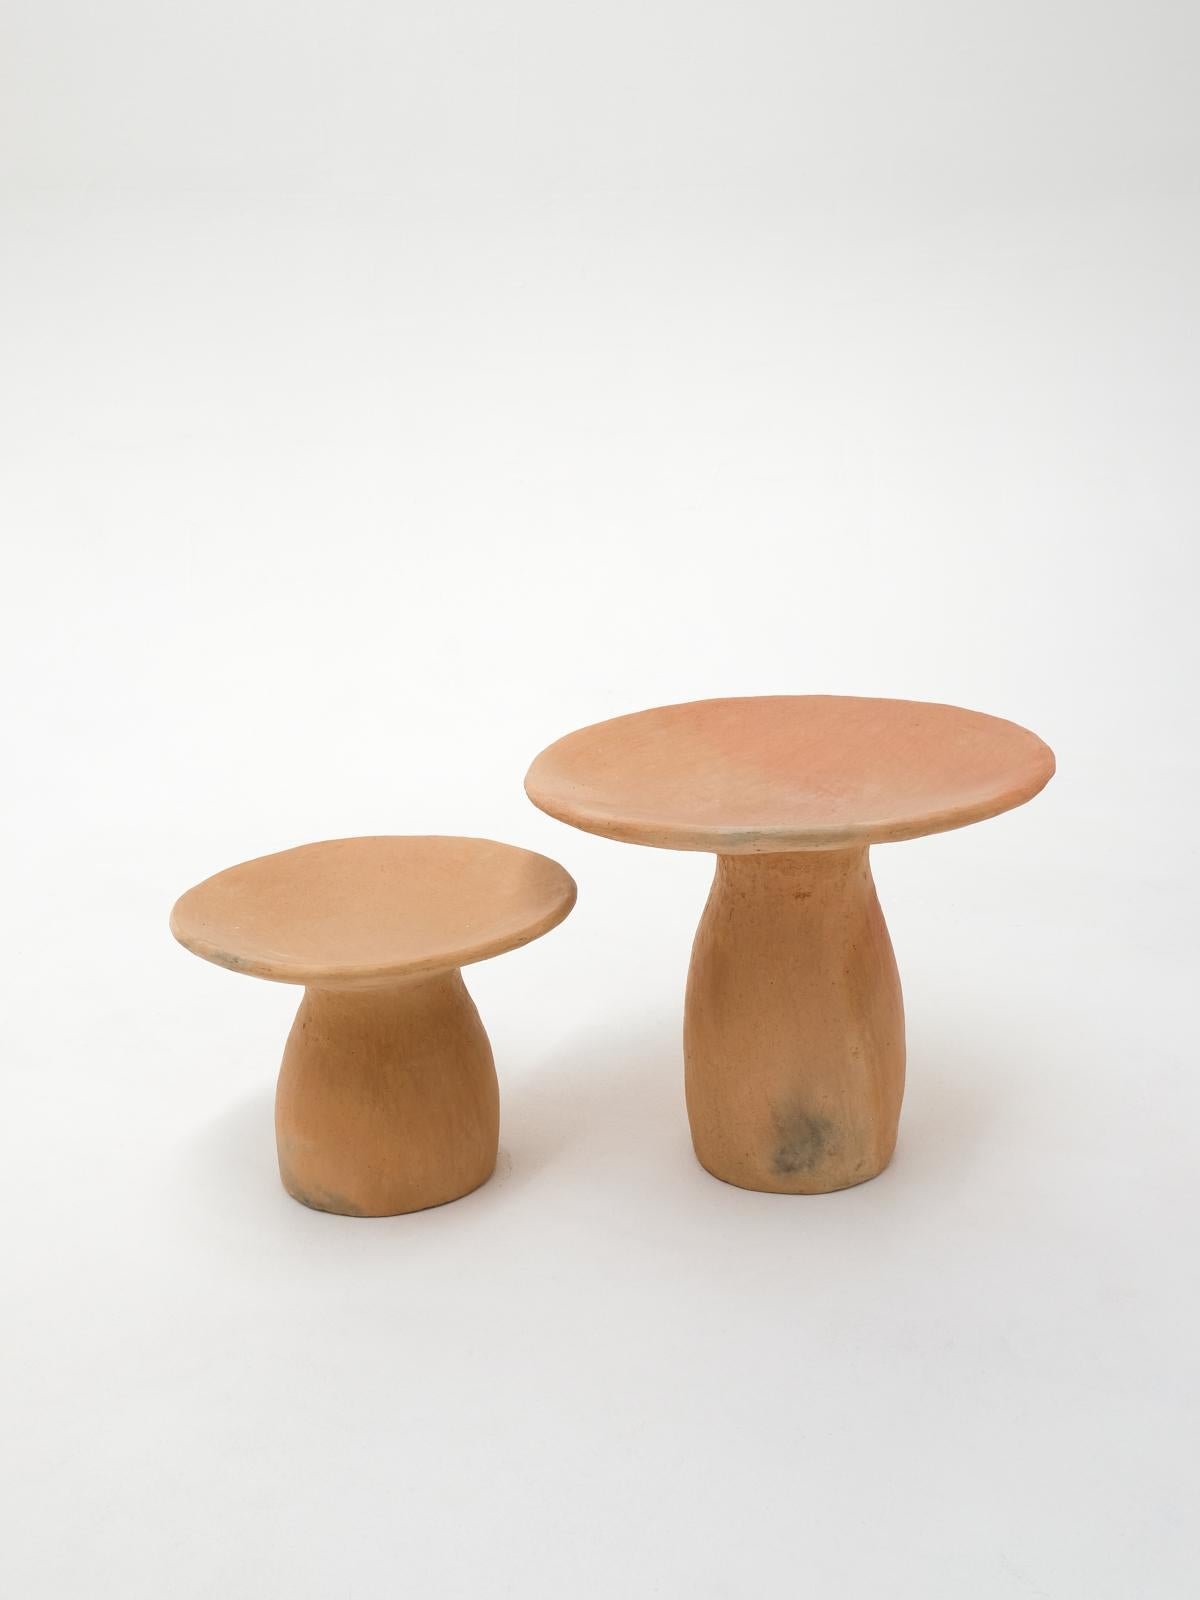 Terracotta contemporary Side Table Made of Clay, Handcrafted by the Potter Houda For Sale 7